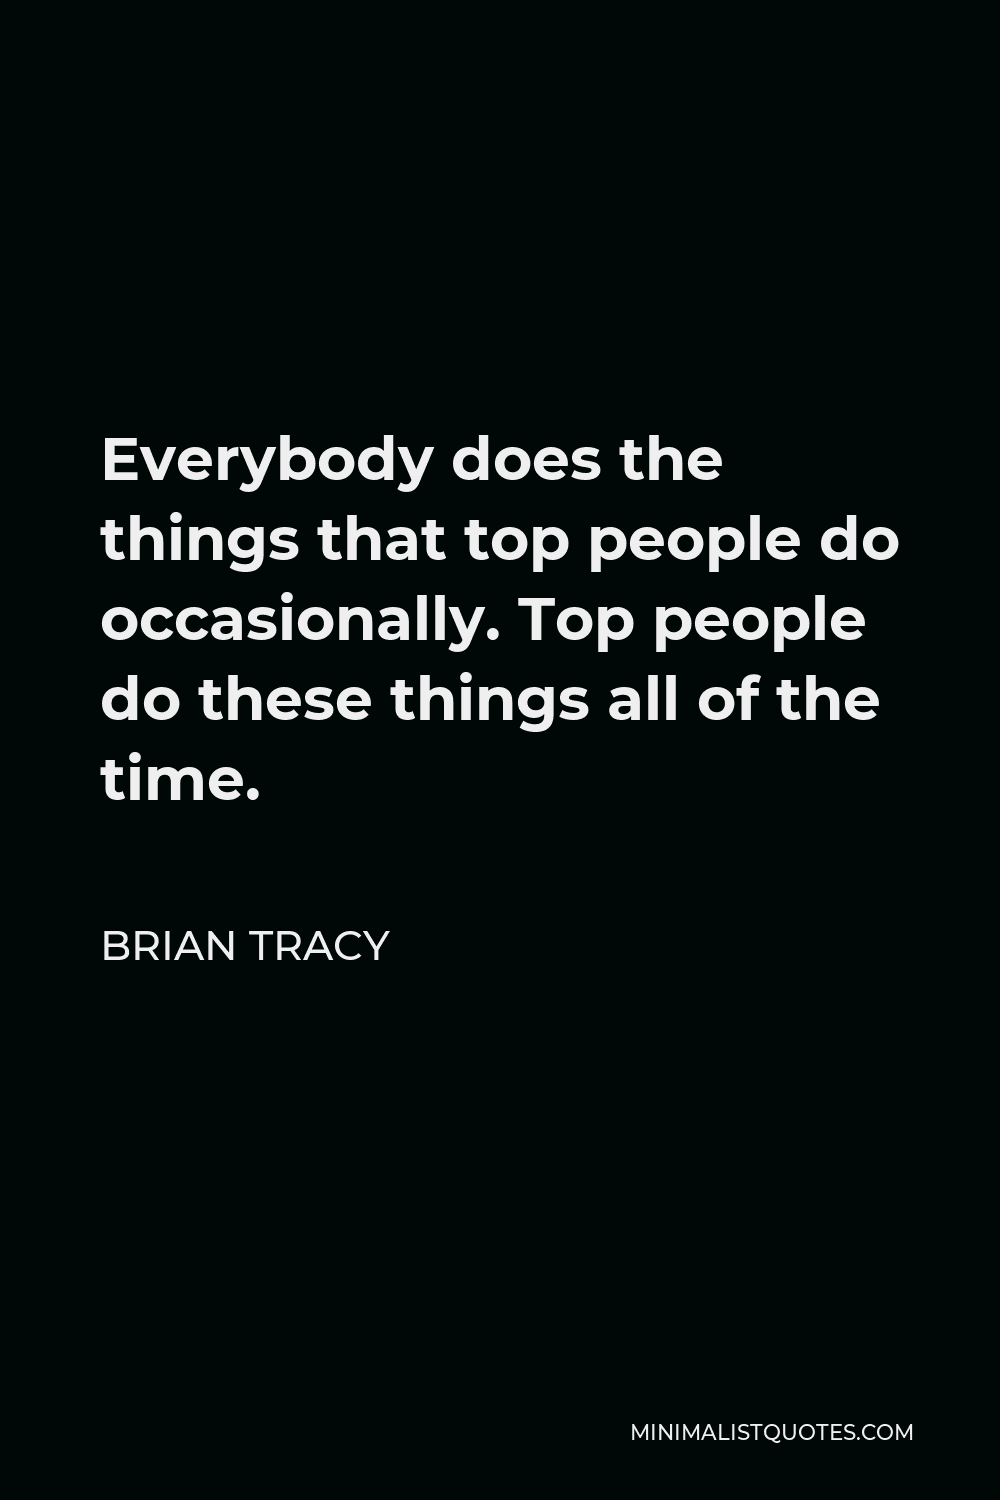 Brian Tracy Quote - Everybody does the things that top people do occasionally. Top people do these things all of the time.